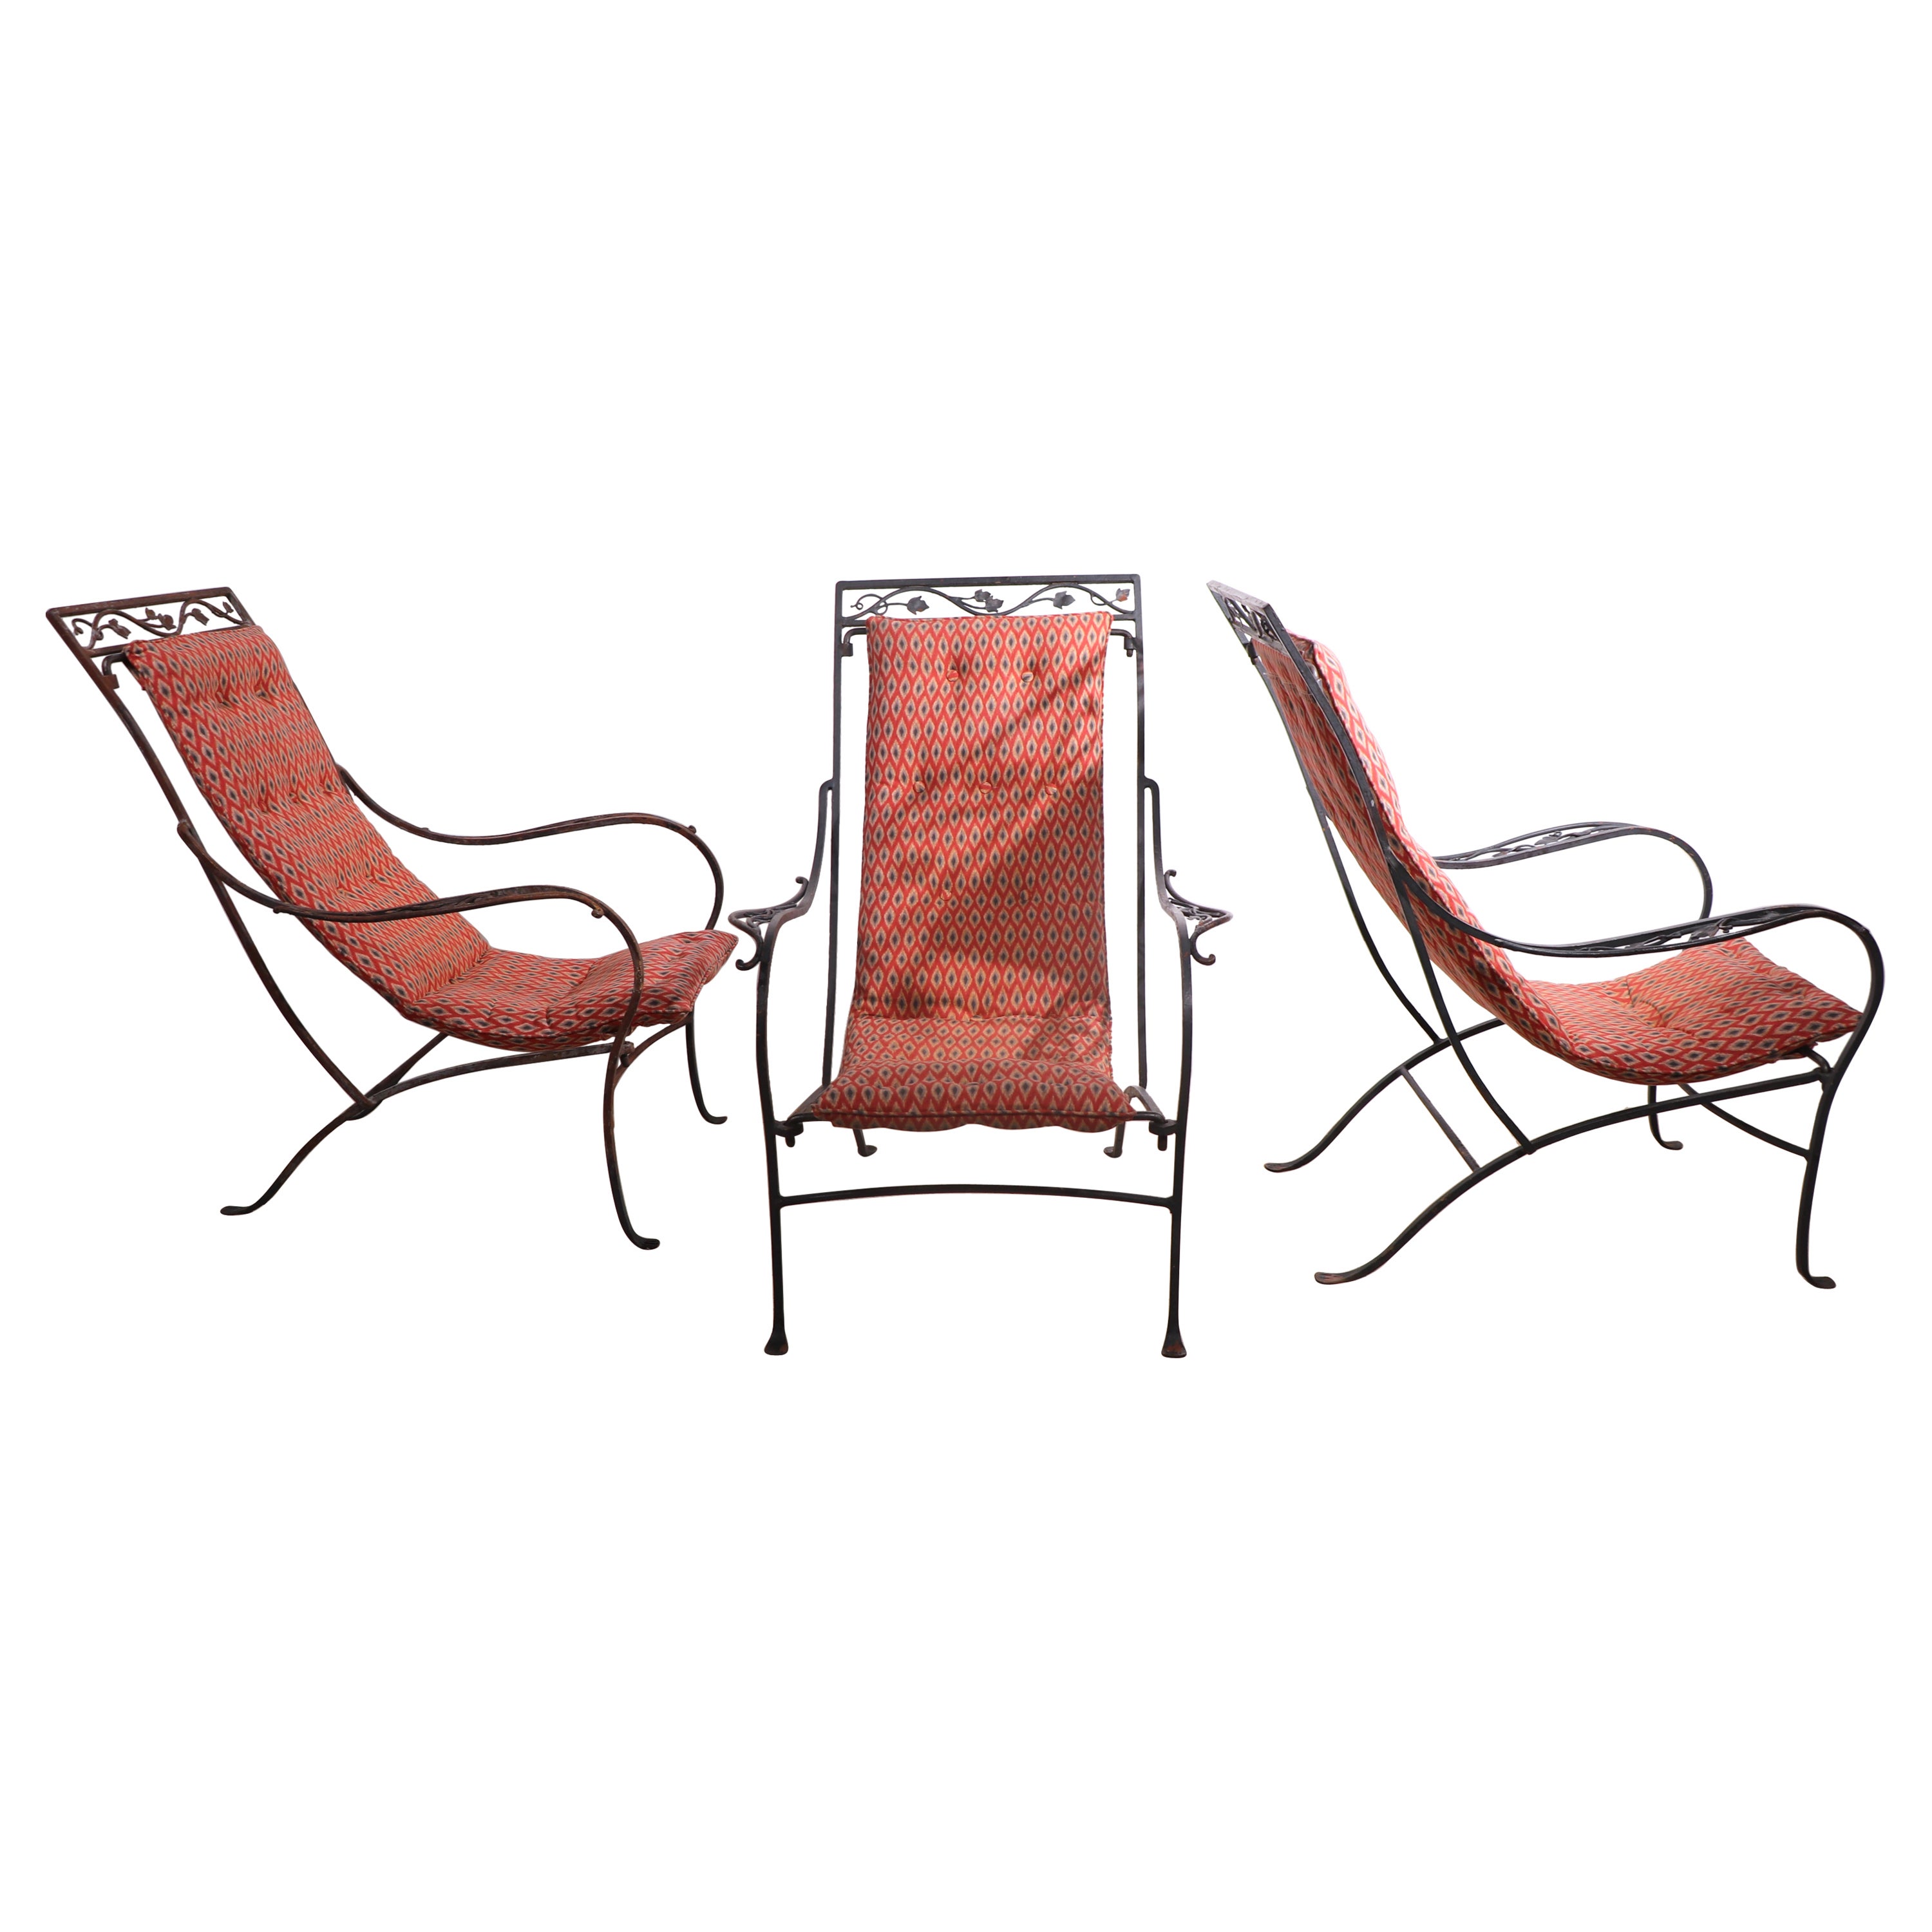 Set of Three Garden  Patio Poolside Sling Seat  Lounge Chairs by Salterini